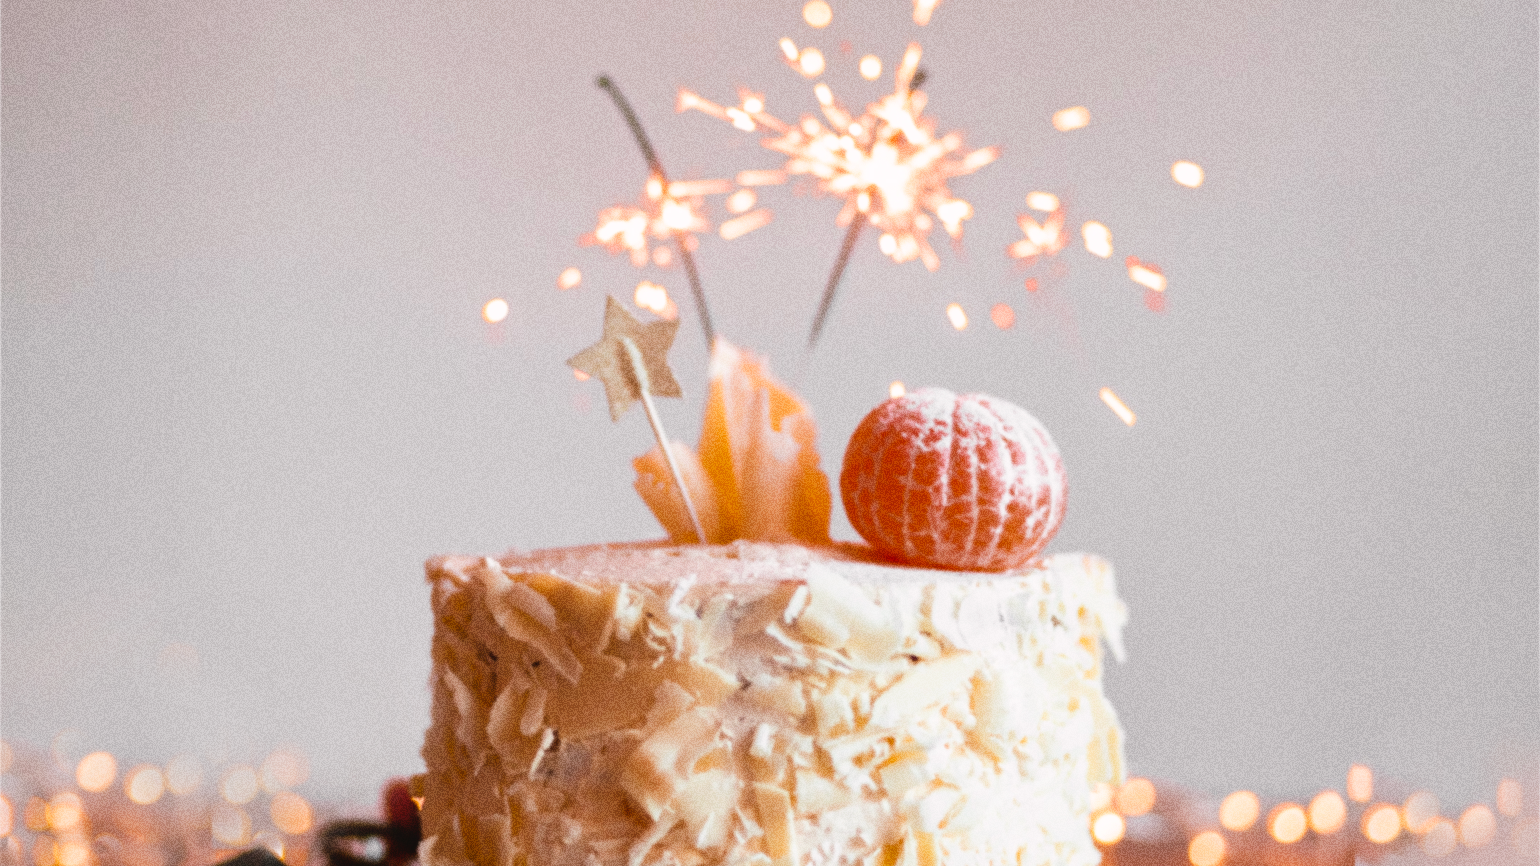 A cake with sparklers to celebrate the different types of goals